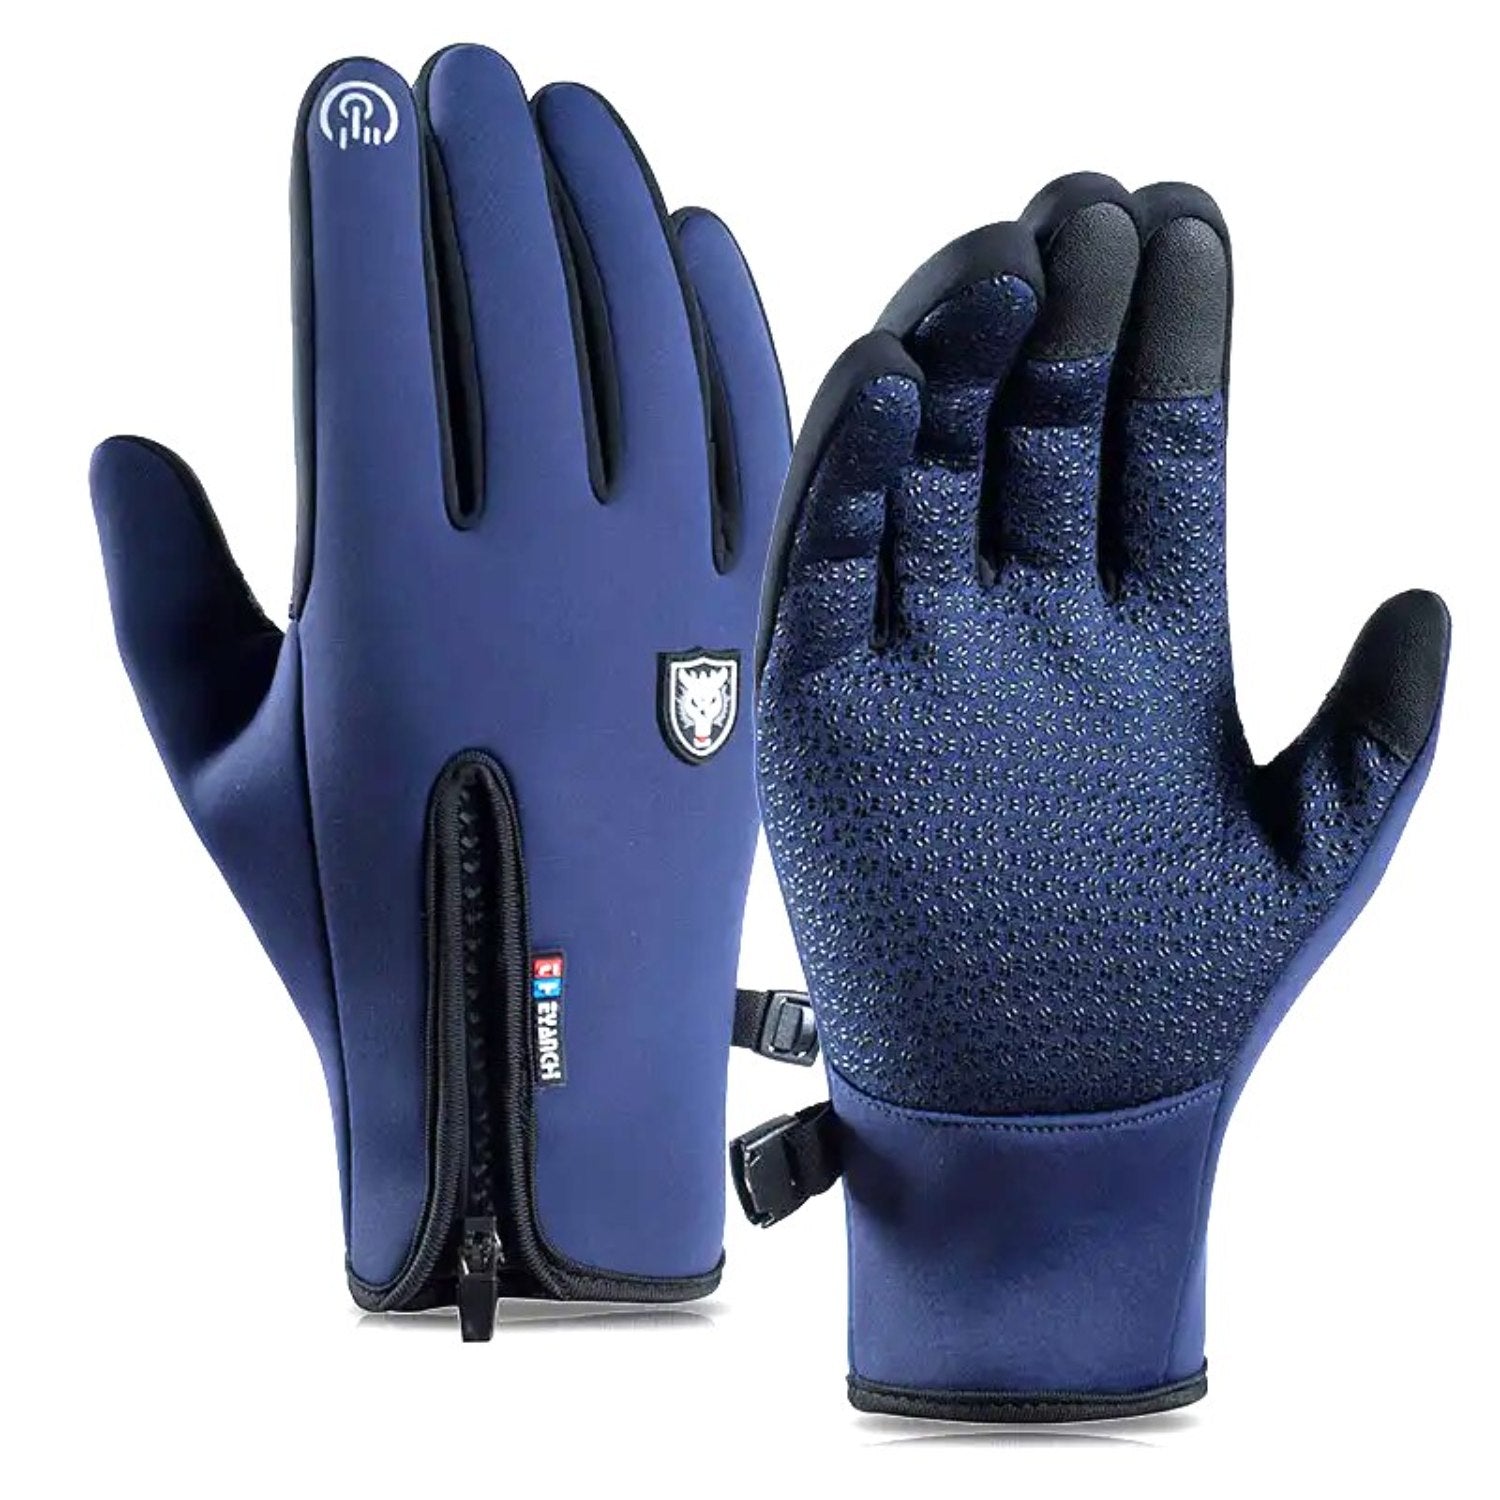 Buy Gokyo Kaza Winter Windproof Gloves with Zipper Navy Blue | Cold Weather Gloves at Gokyo Outdoor Clothing & Gear